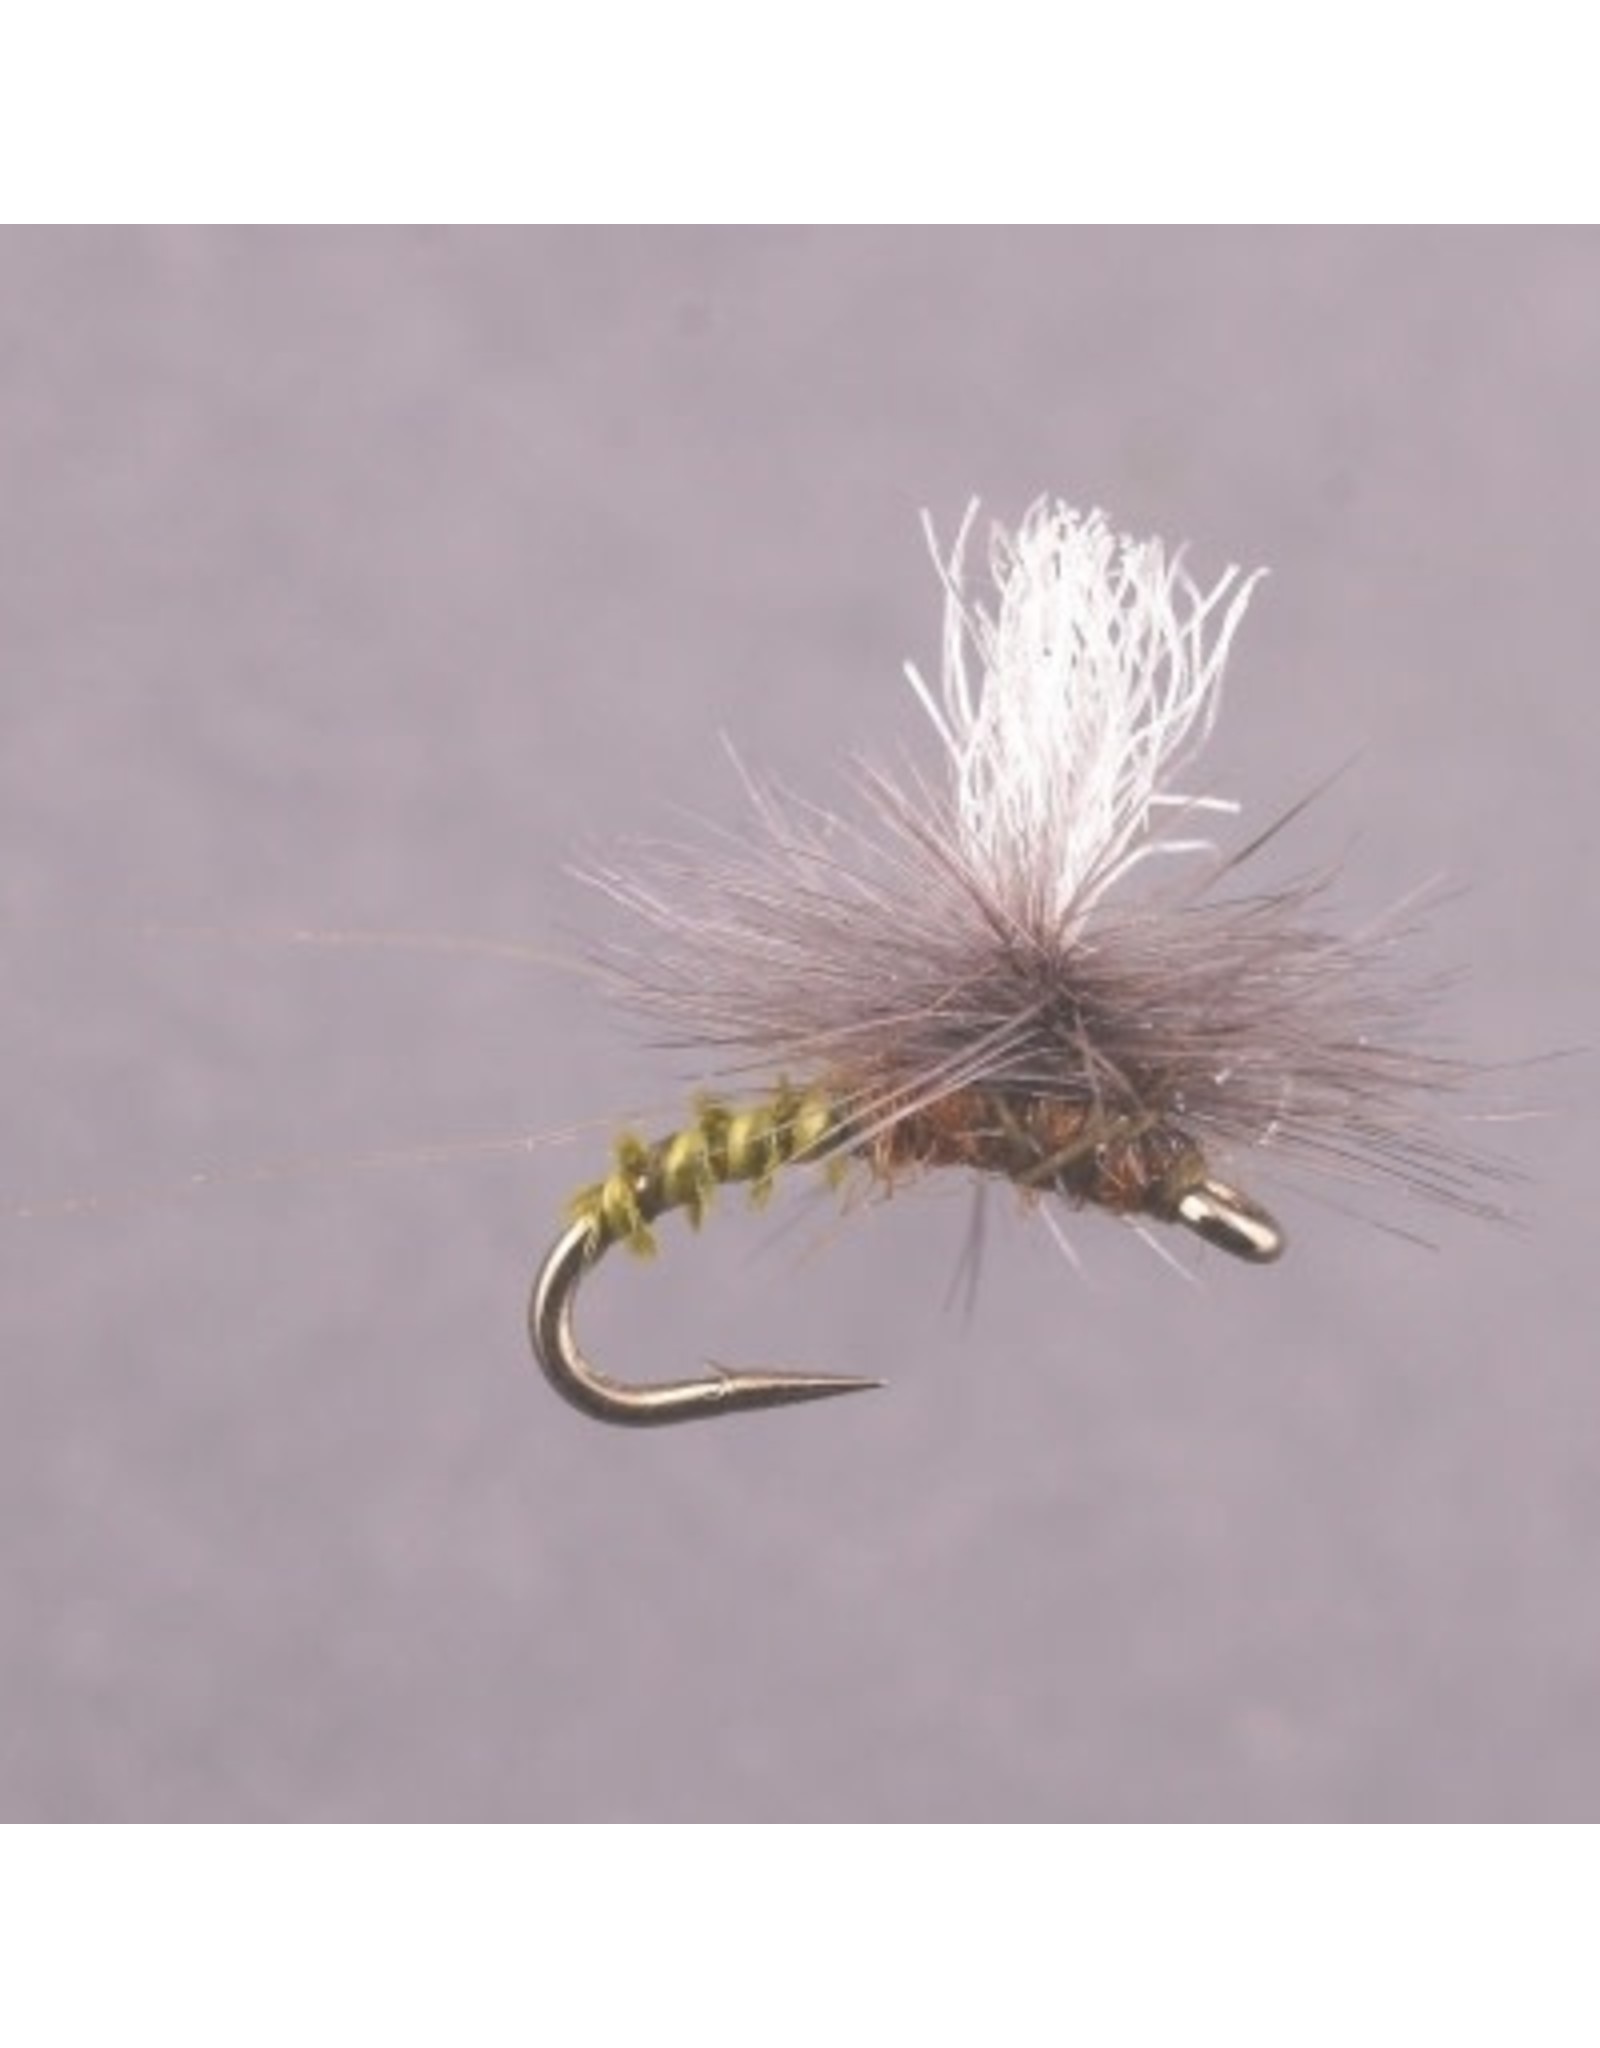 GT ADULT BWO #16